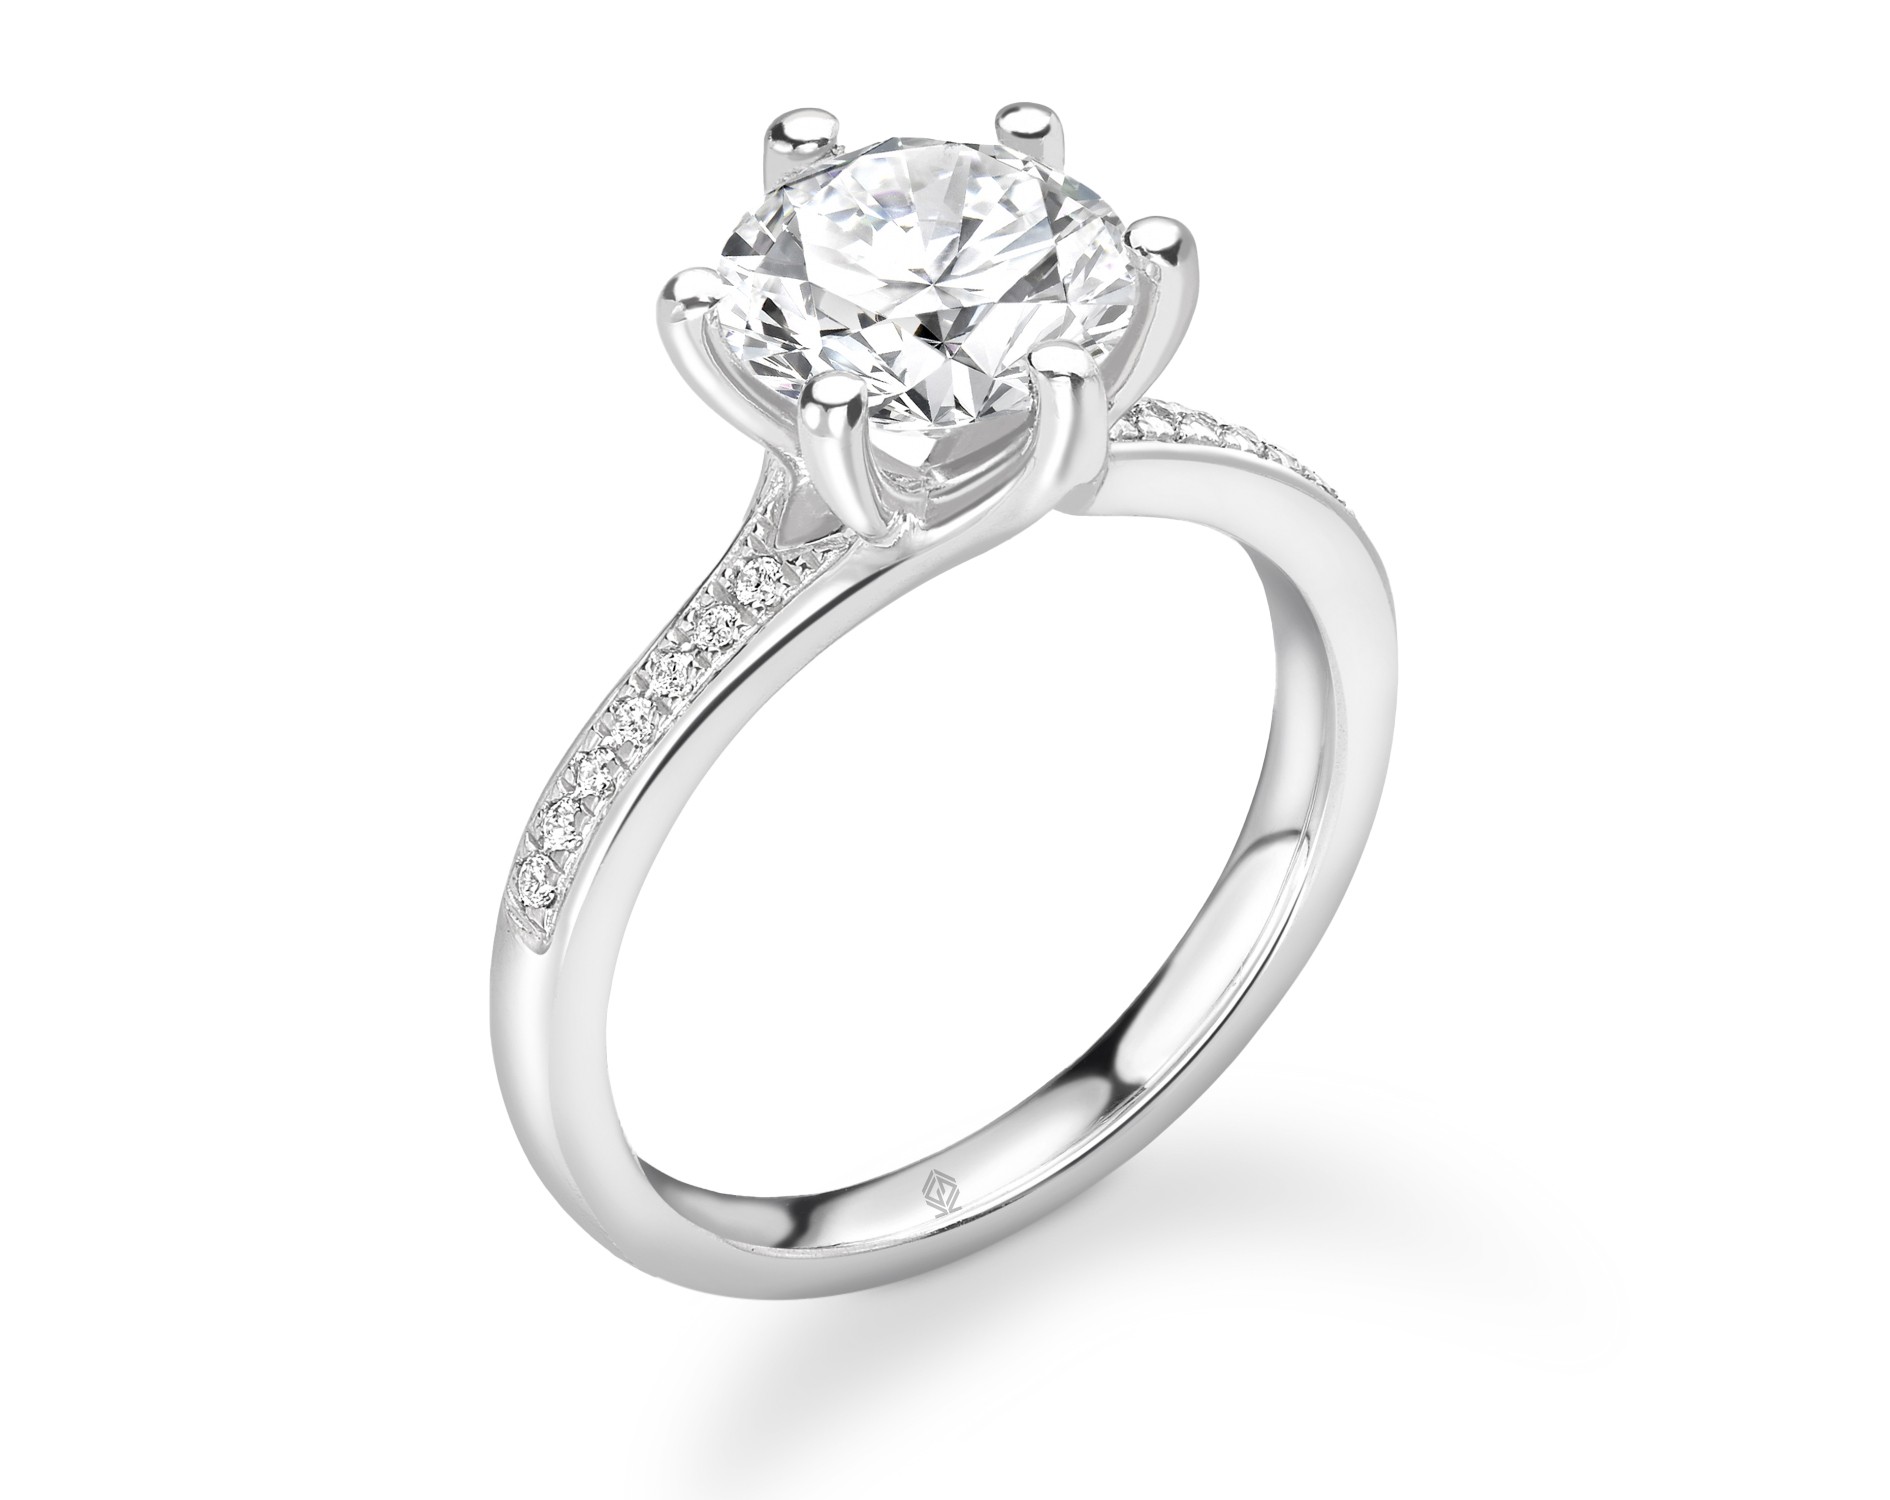 18K WHITE GOLD ROUND CUT 6 PRONGS DIAMOND ENGAGEMENT RING WITH CHANNEL SET SIDE STONES